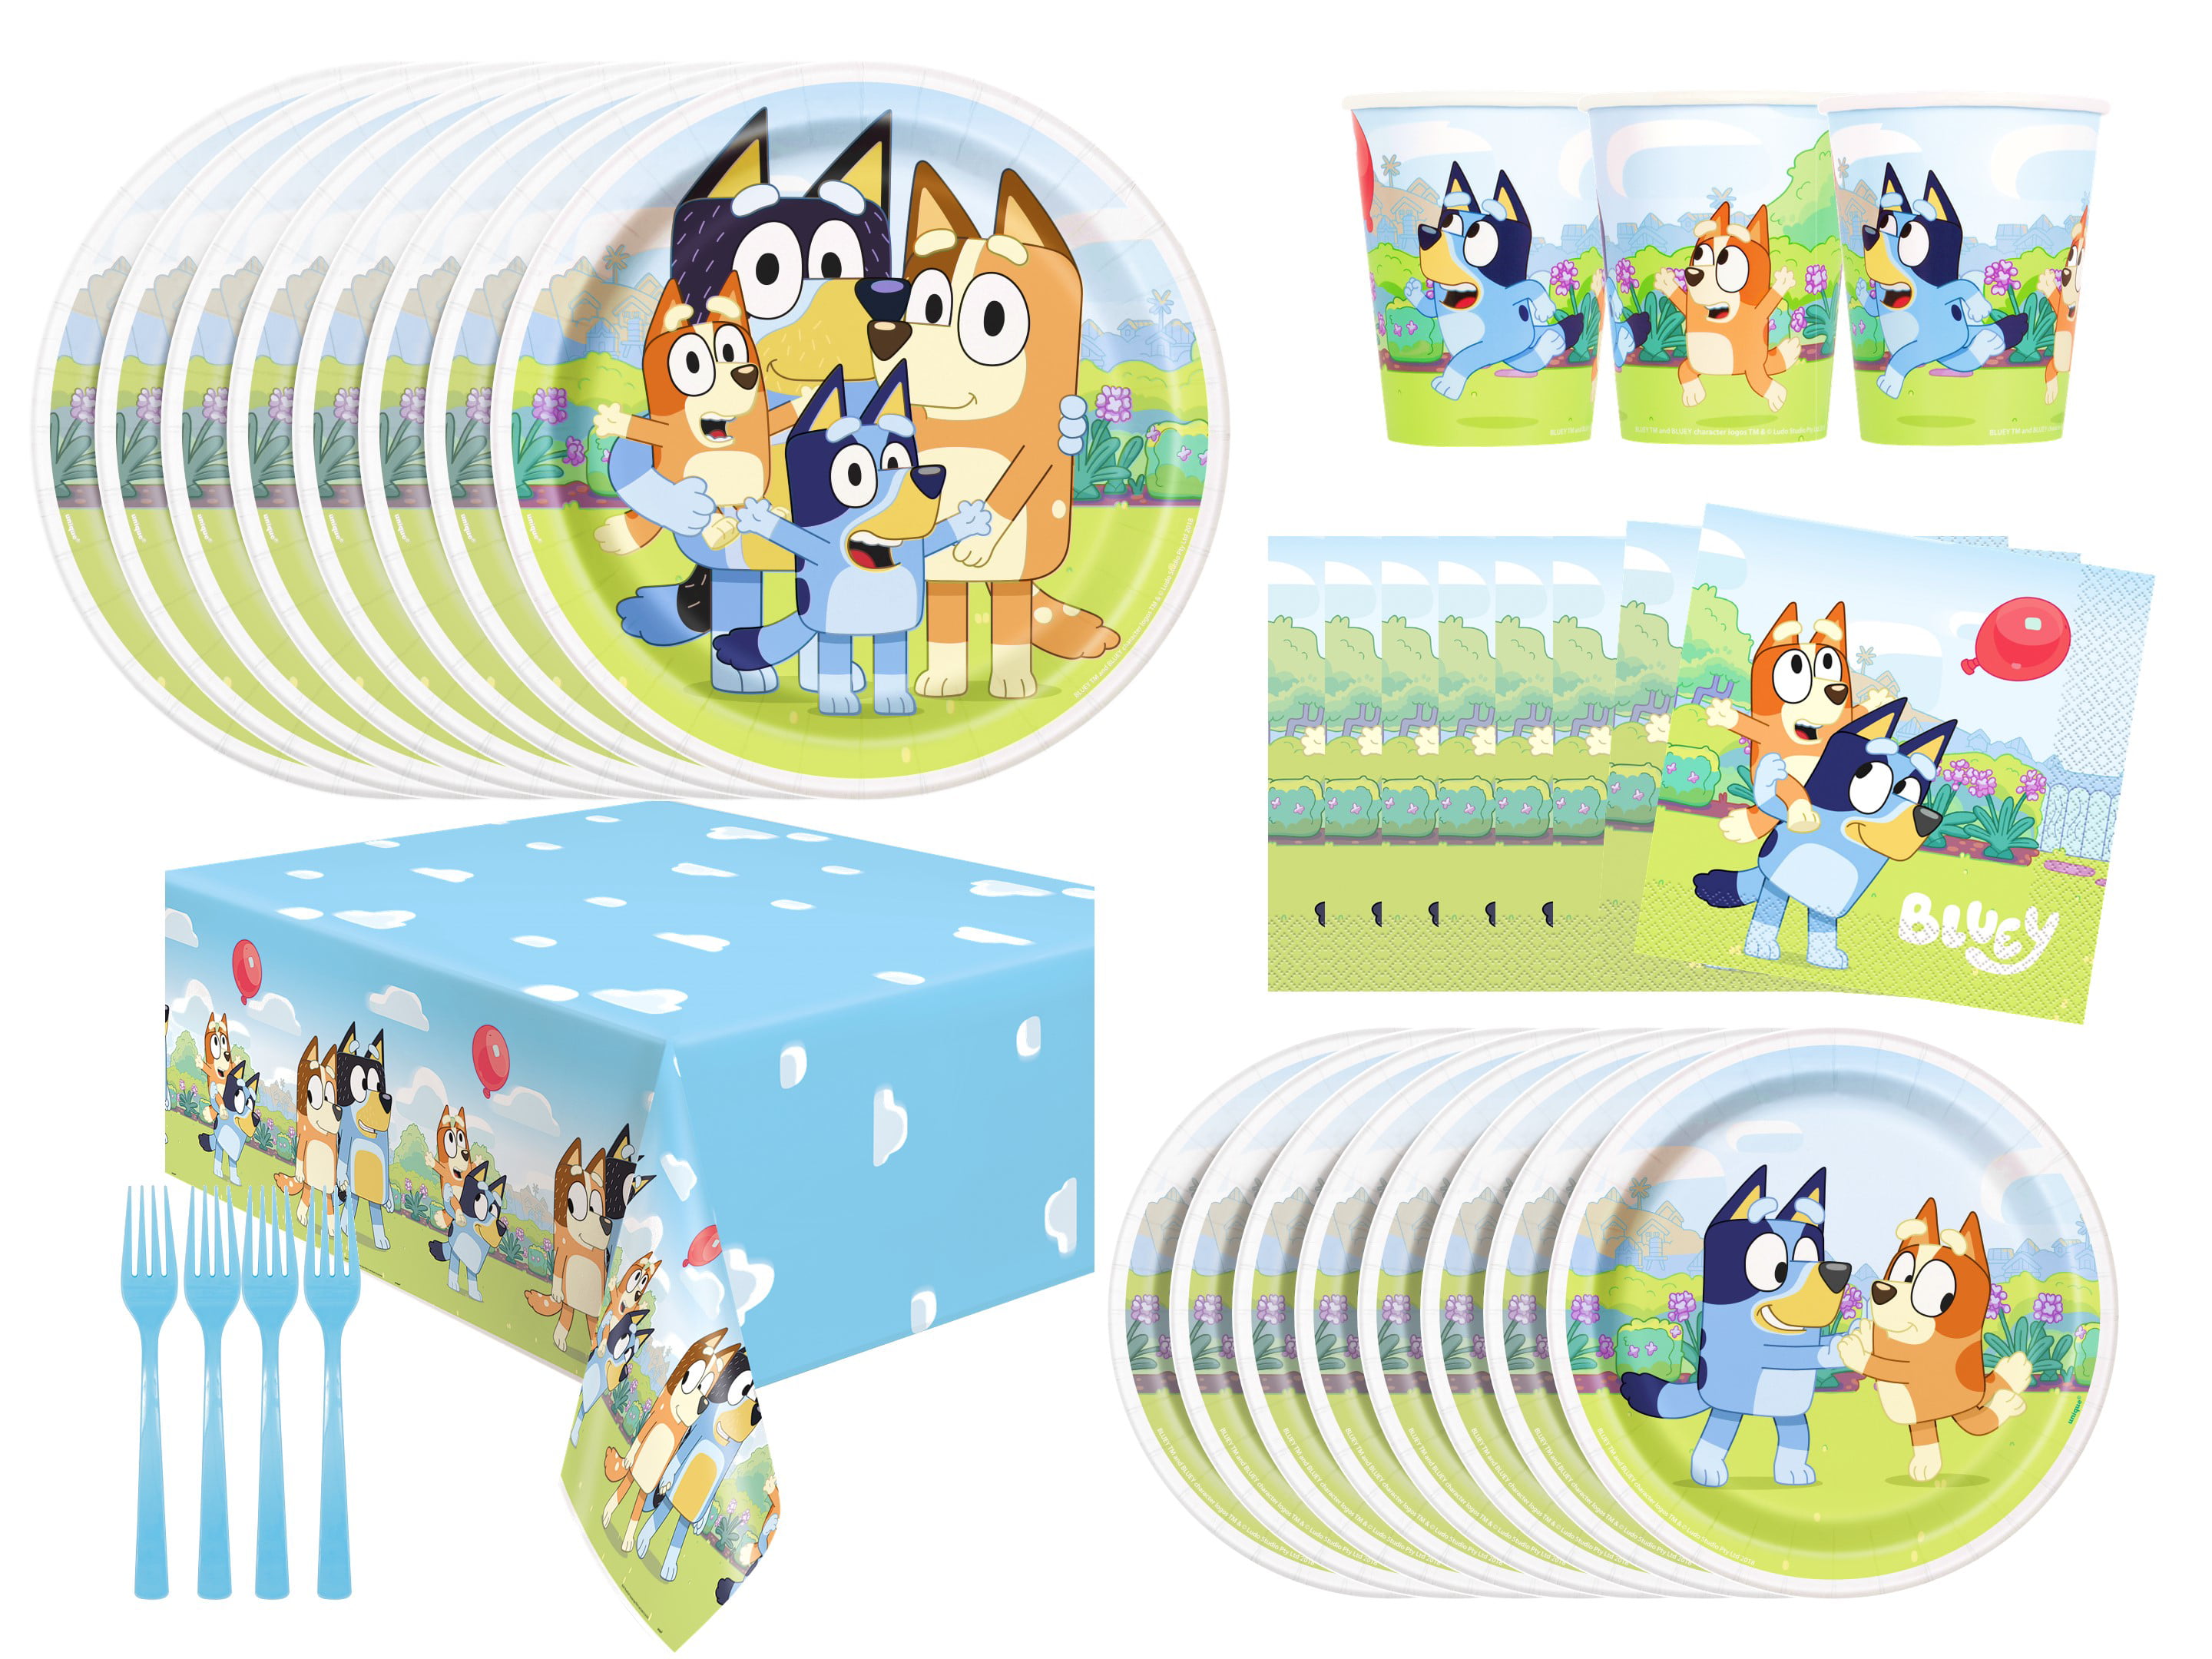 Bluey Birthday Party Supplies | Bluey Decorations | Bluey Plates | Bluey Napkins | Bluey Table Cover | Blue Cups - Serves 8